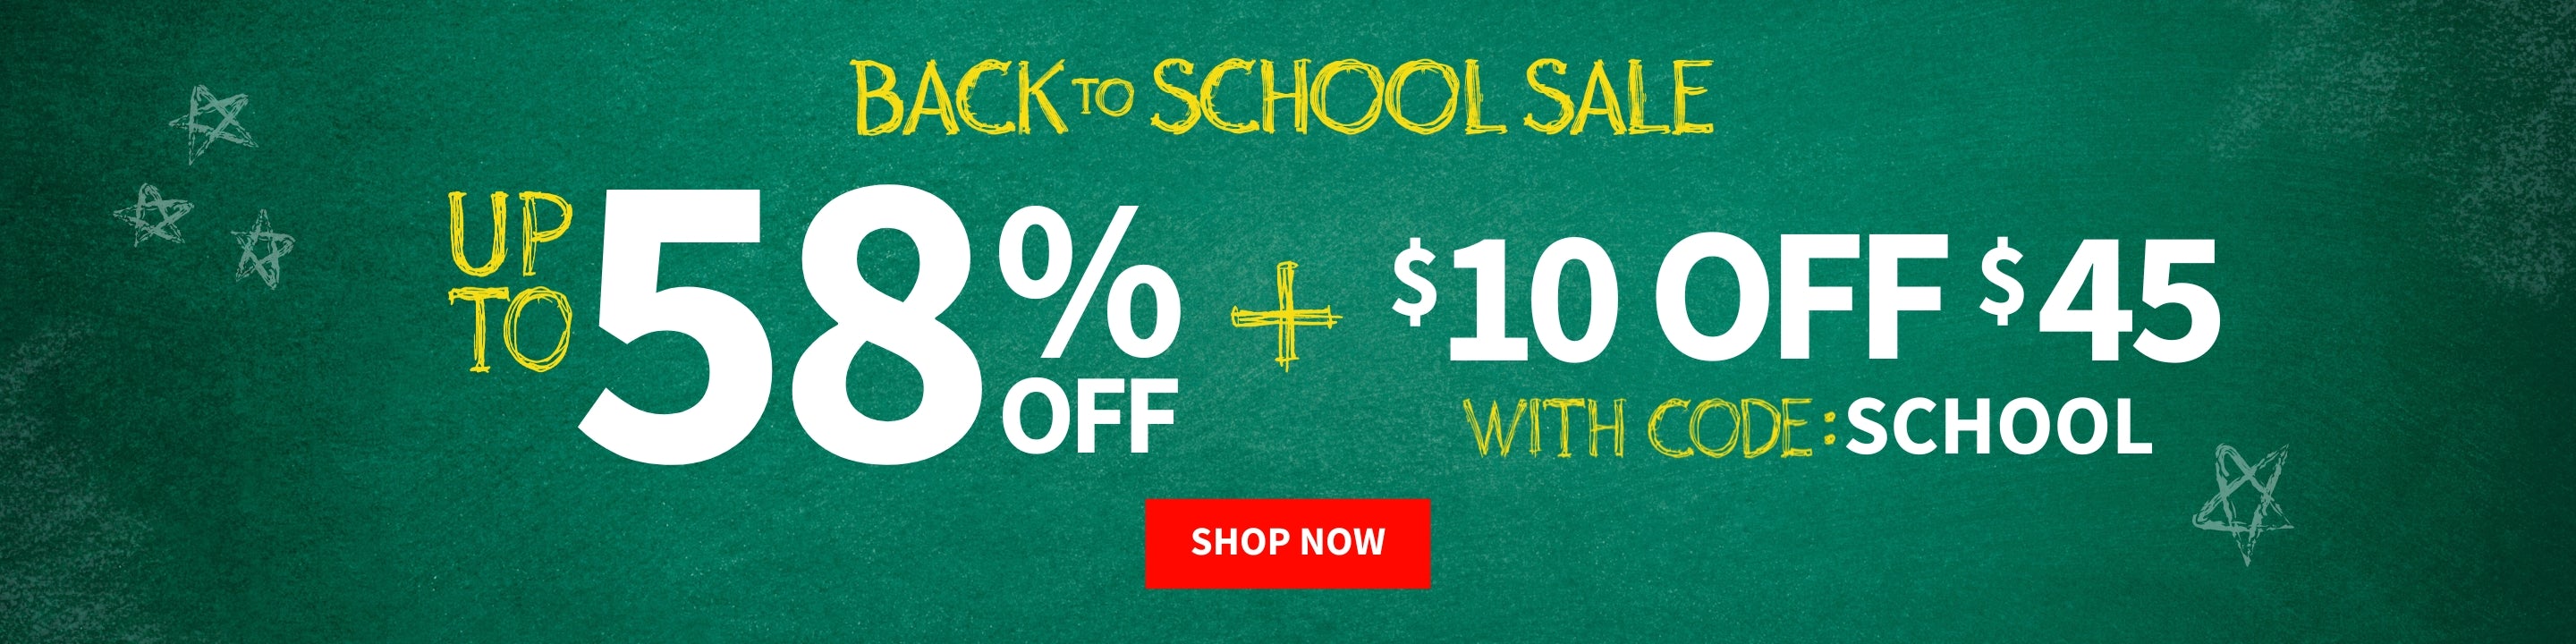 Back to School Sale, Up to 58% off + $10 Off $45 with code: School - Shop Now